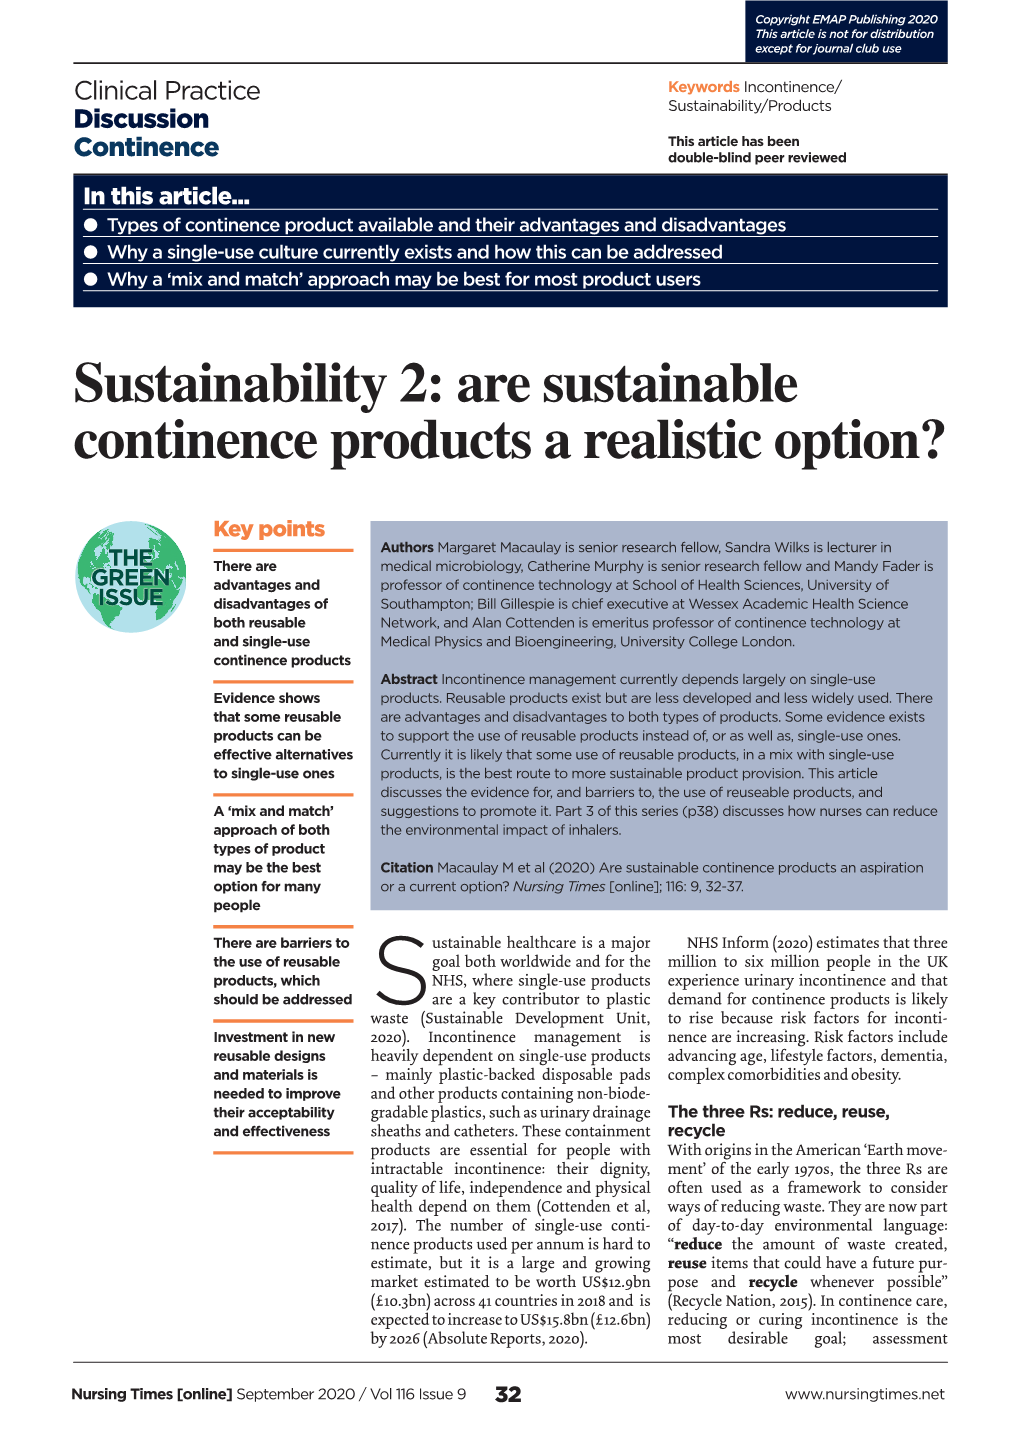 Are Sustainable Continence Products a Realistic Option?